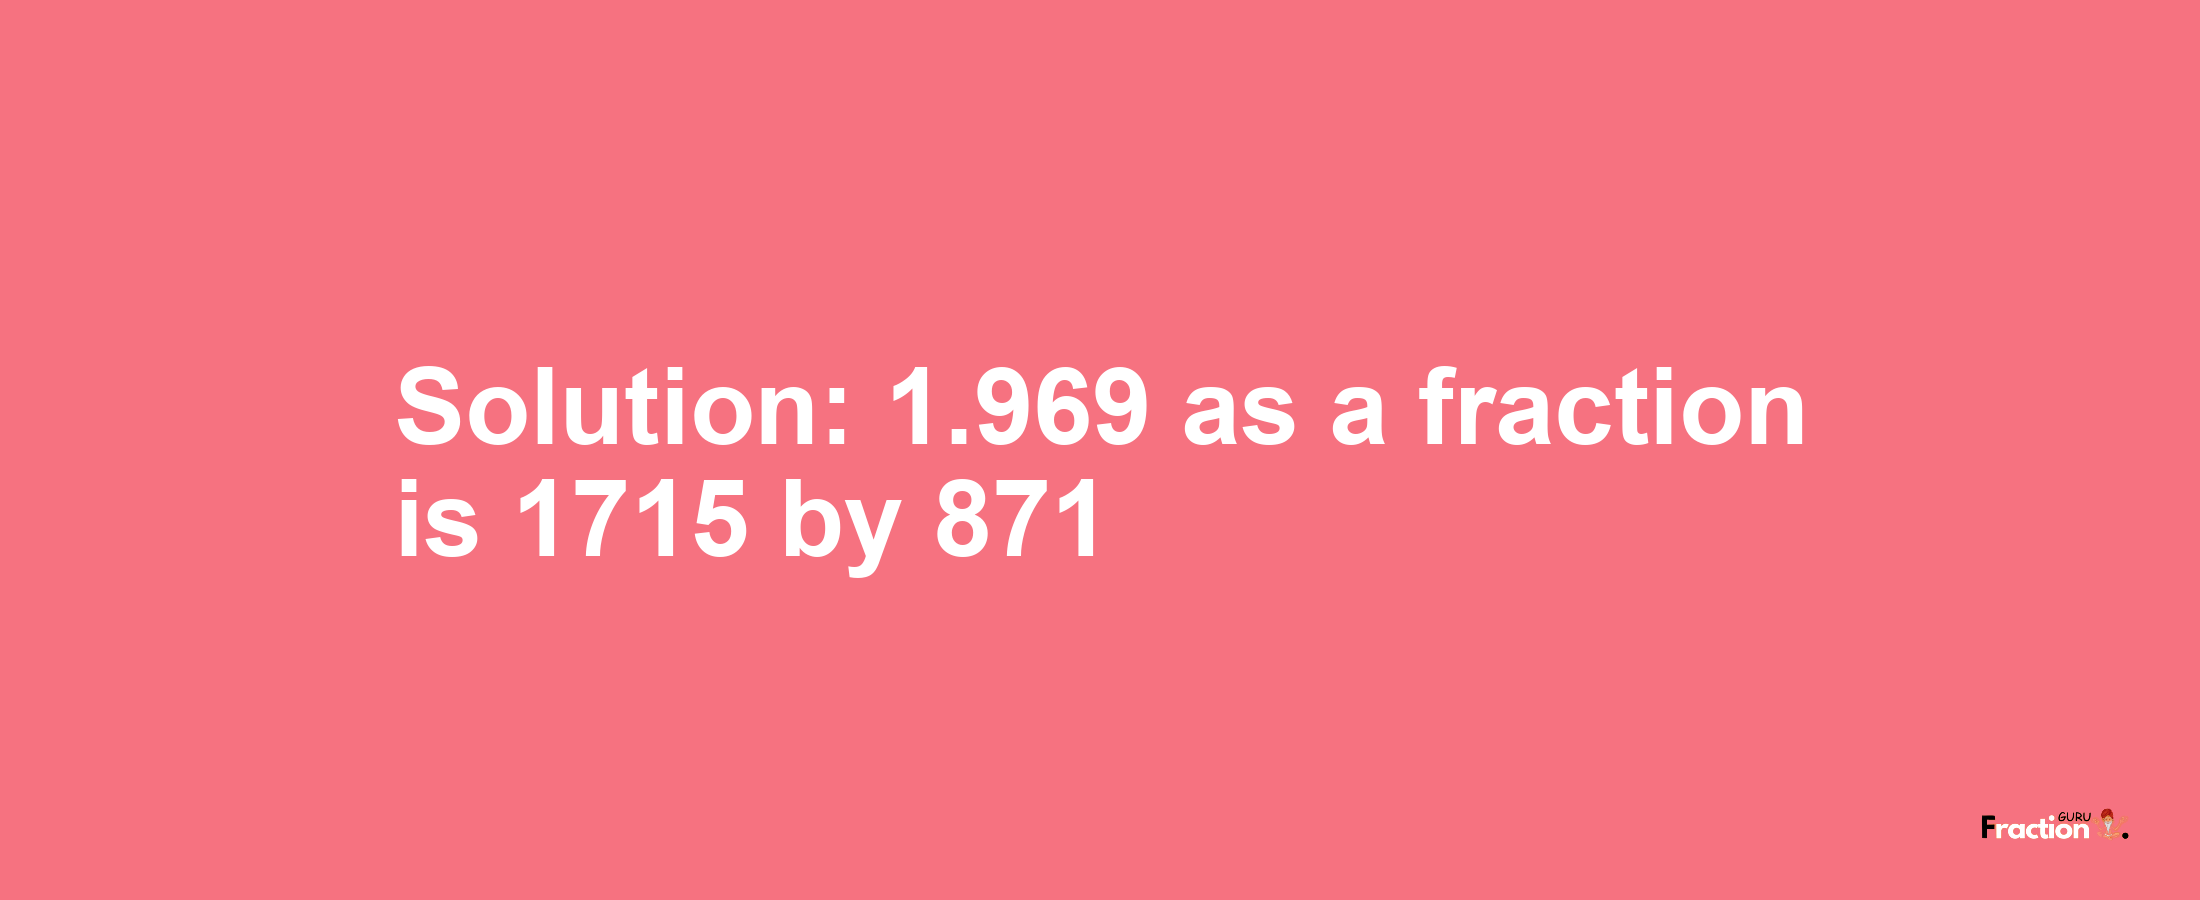 Solution:1.969 as a fraction is 1715/871